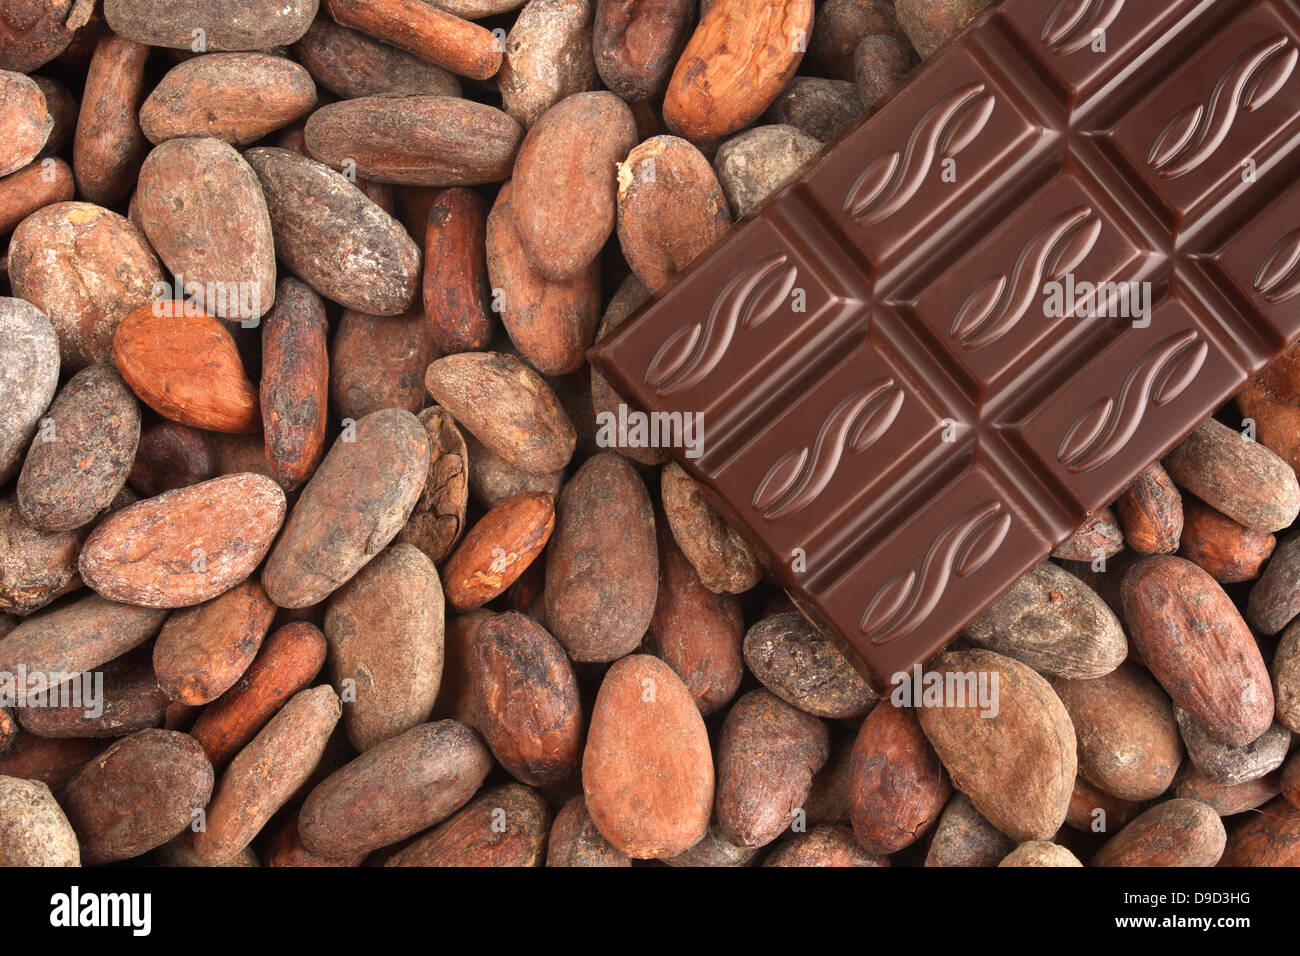 Plain chocolate with cacao beans Stock Photo